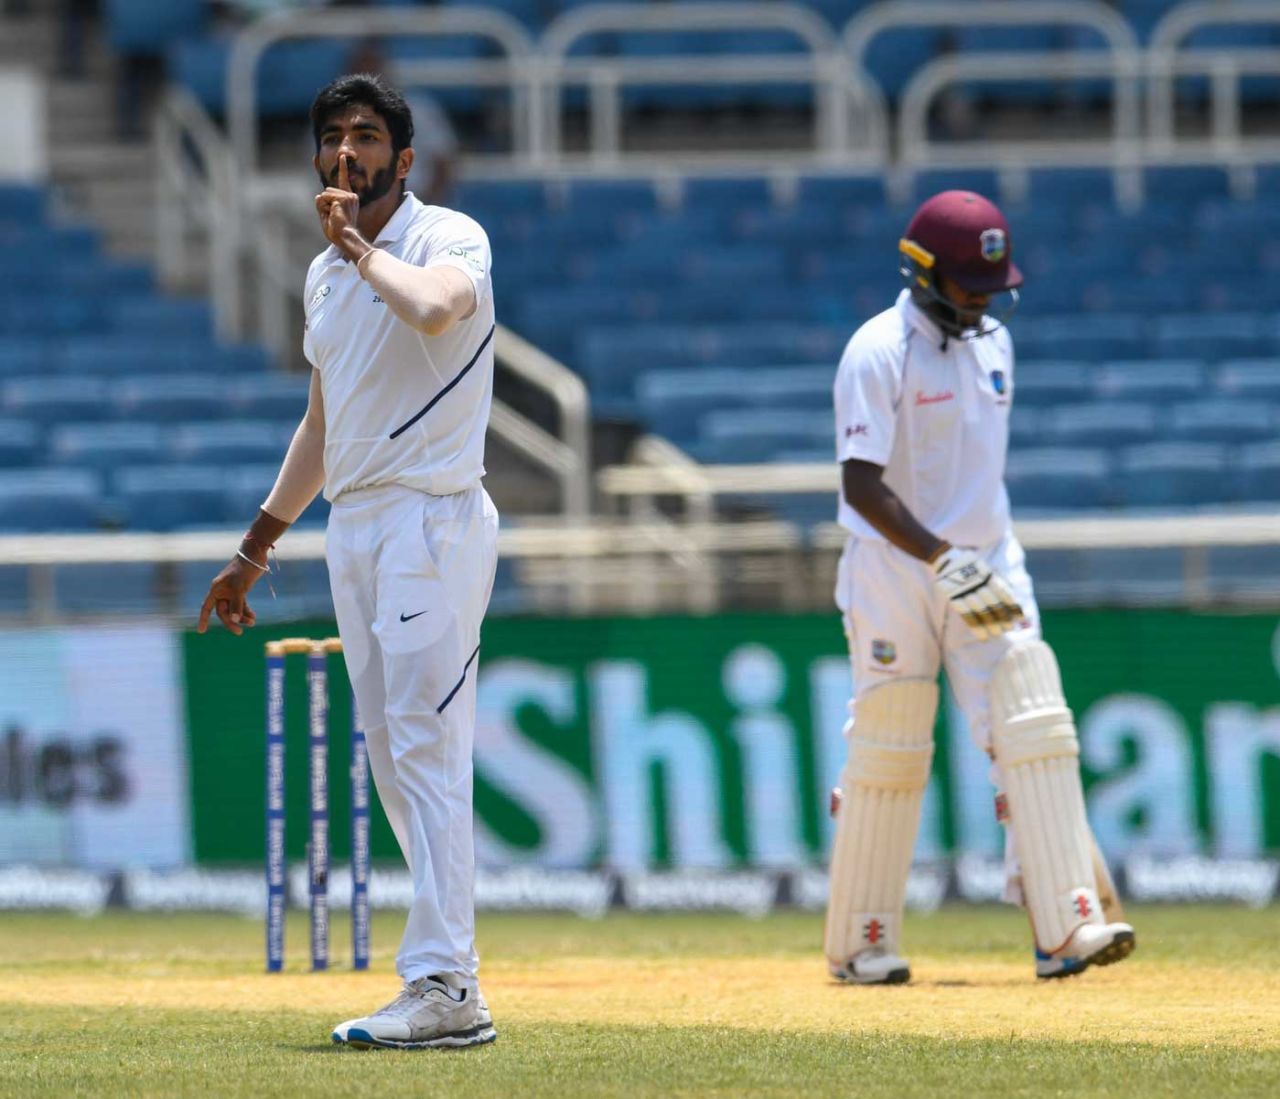 Jasprit Bumrah gestures at someone, West Indies v India, 2nd Test, Kingston, 4th day, September 2, 2019